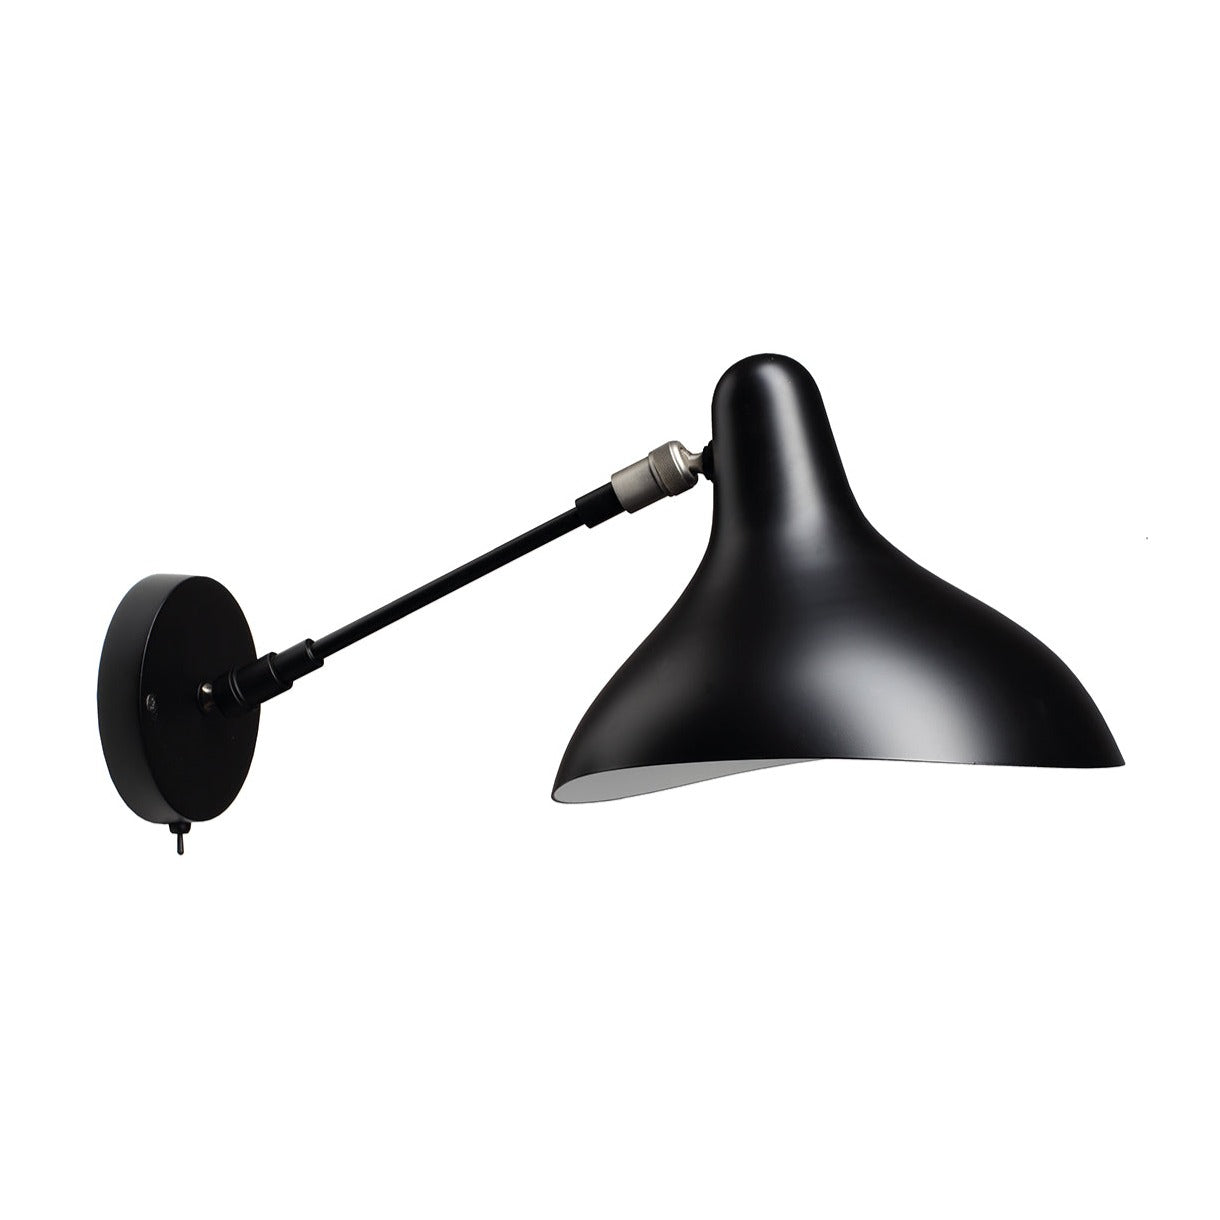 DCW Editions MANTIS BS5 Wall Light